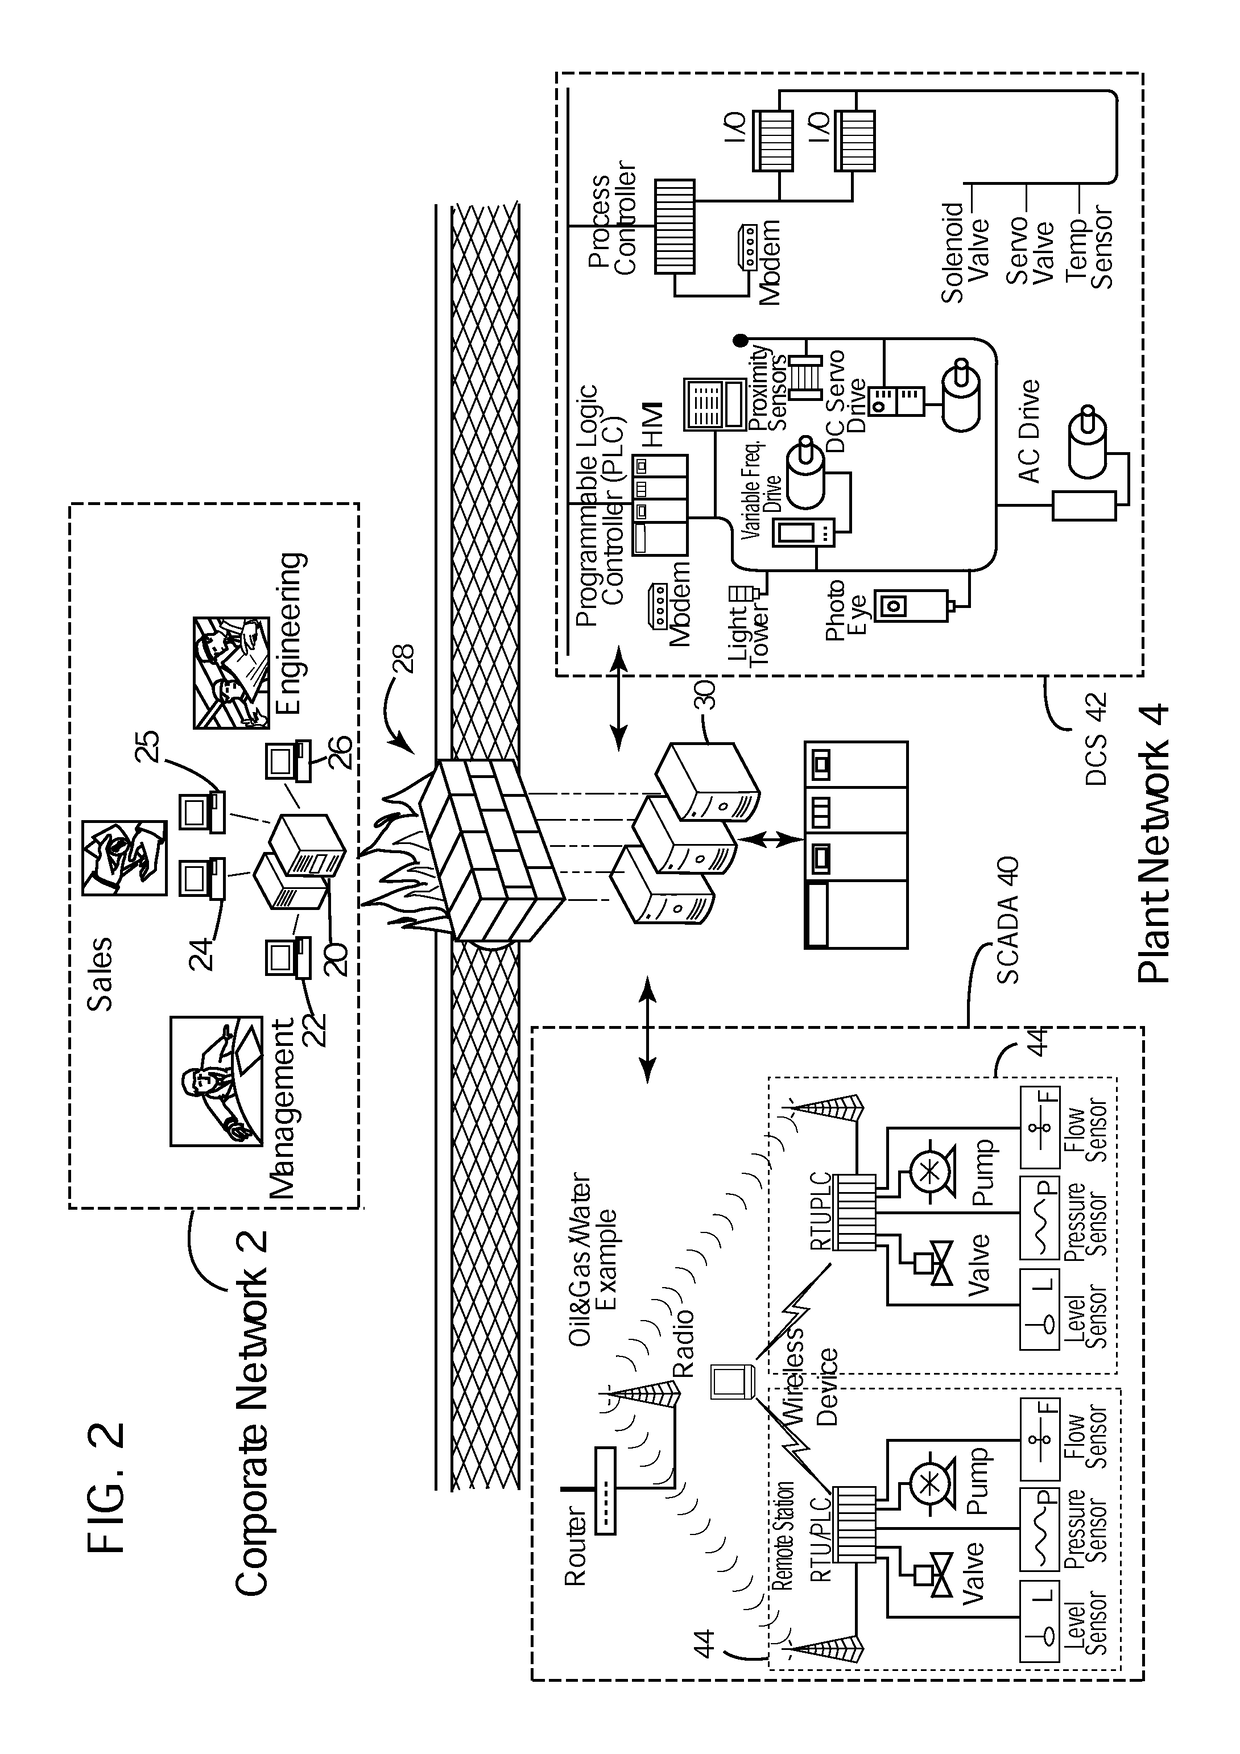 System and method for controlling access to a plant network